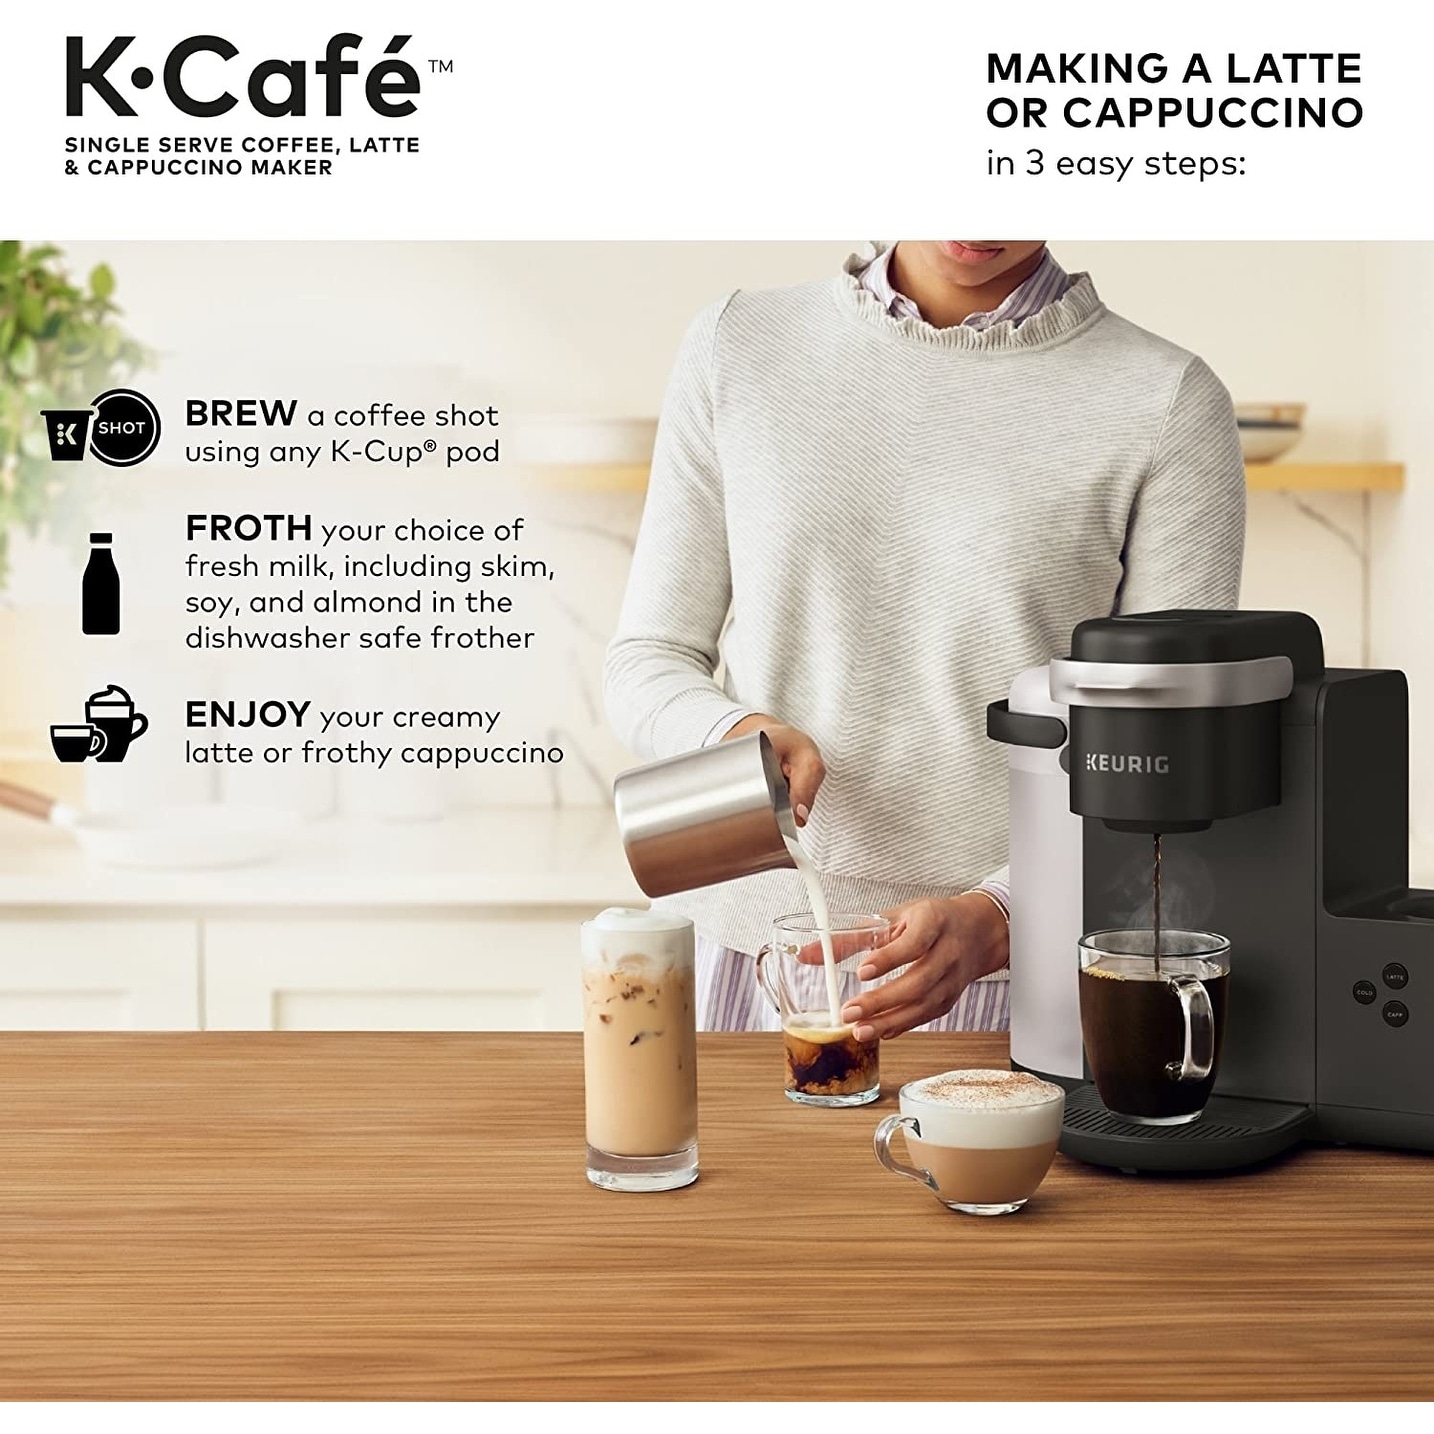 https://ak1.ostkcdn.com/images/products/is/images/direct/f39e62c6ece9d2e689508c762f62de4891b3420b/Keurig-K-Cafe-Single-Serve-K-Cup-Coffee-Maker%2C-Latte-Maker-and-Cappuccino-Maker%2C-With-Frother%2C-Dark-Charcoal.jpg